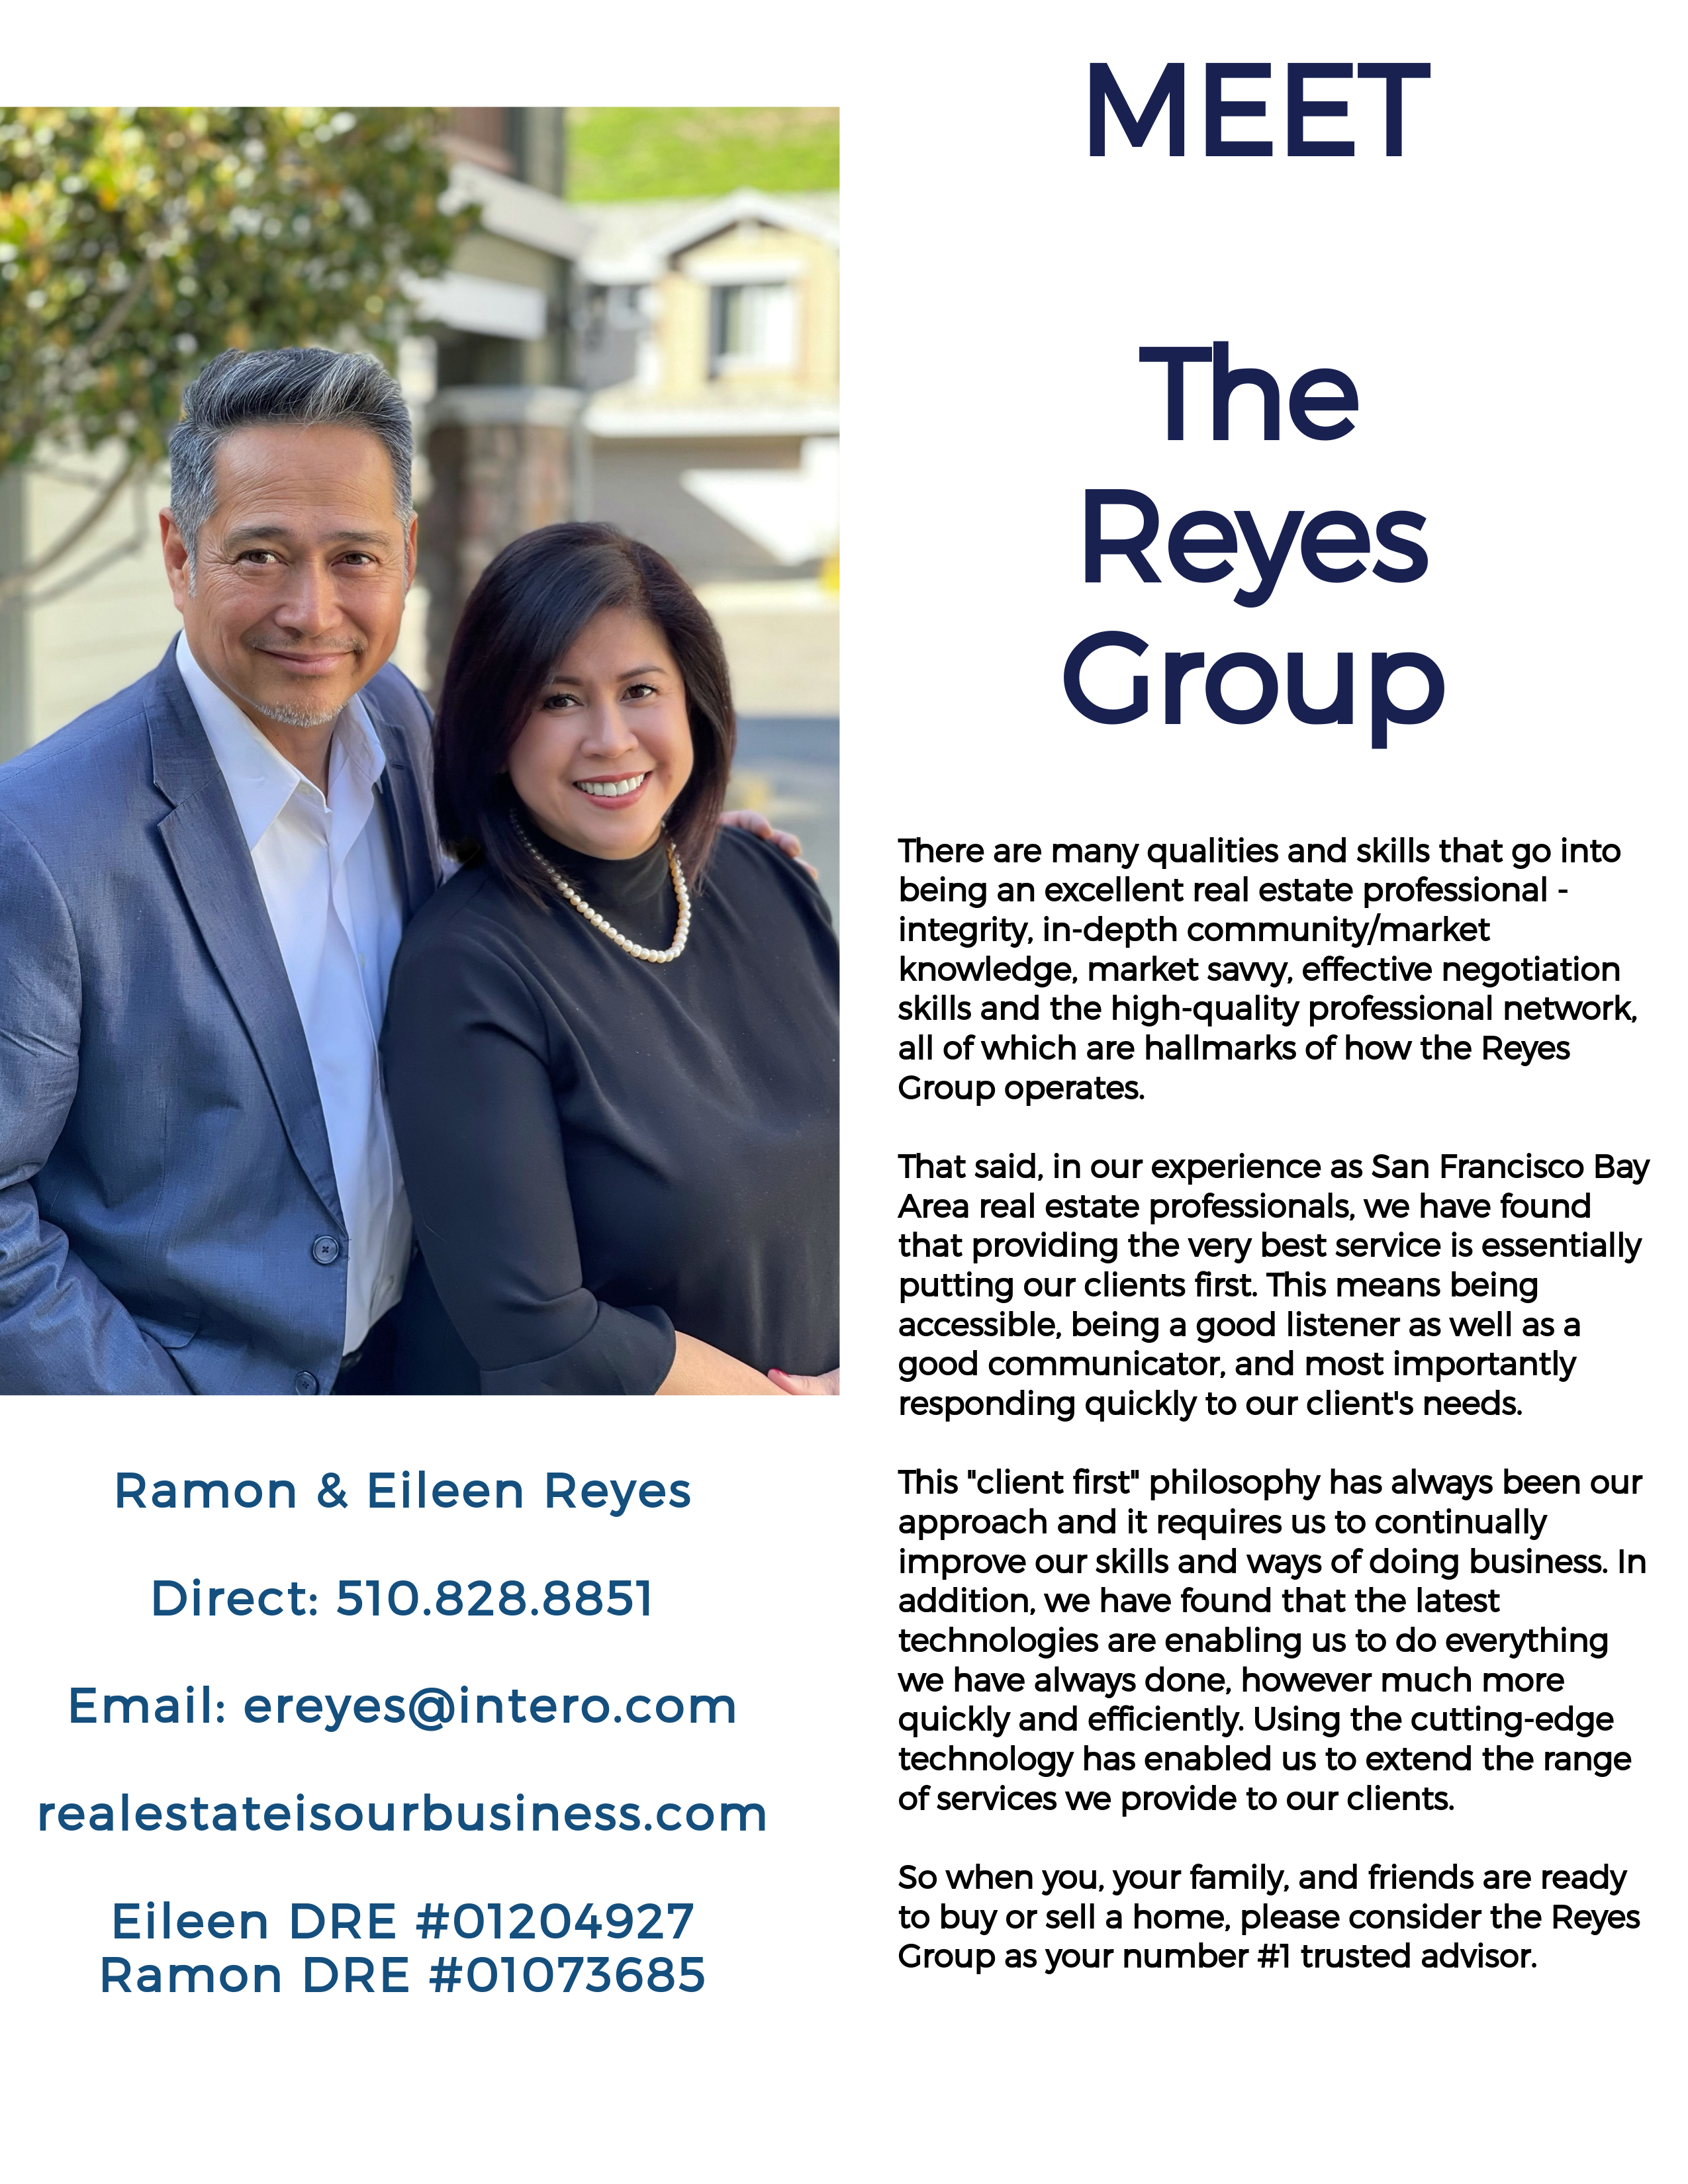 The Reyes Group